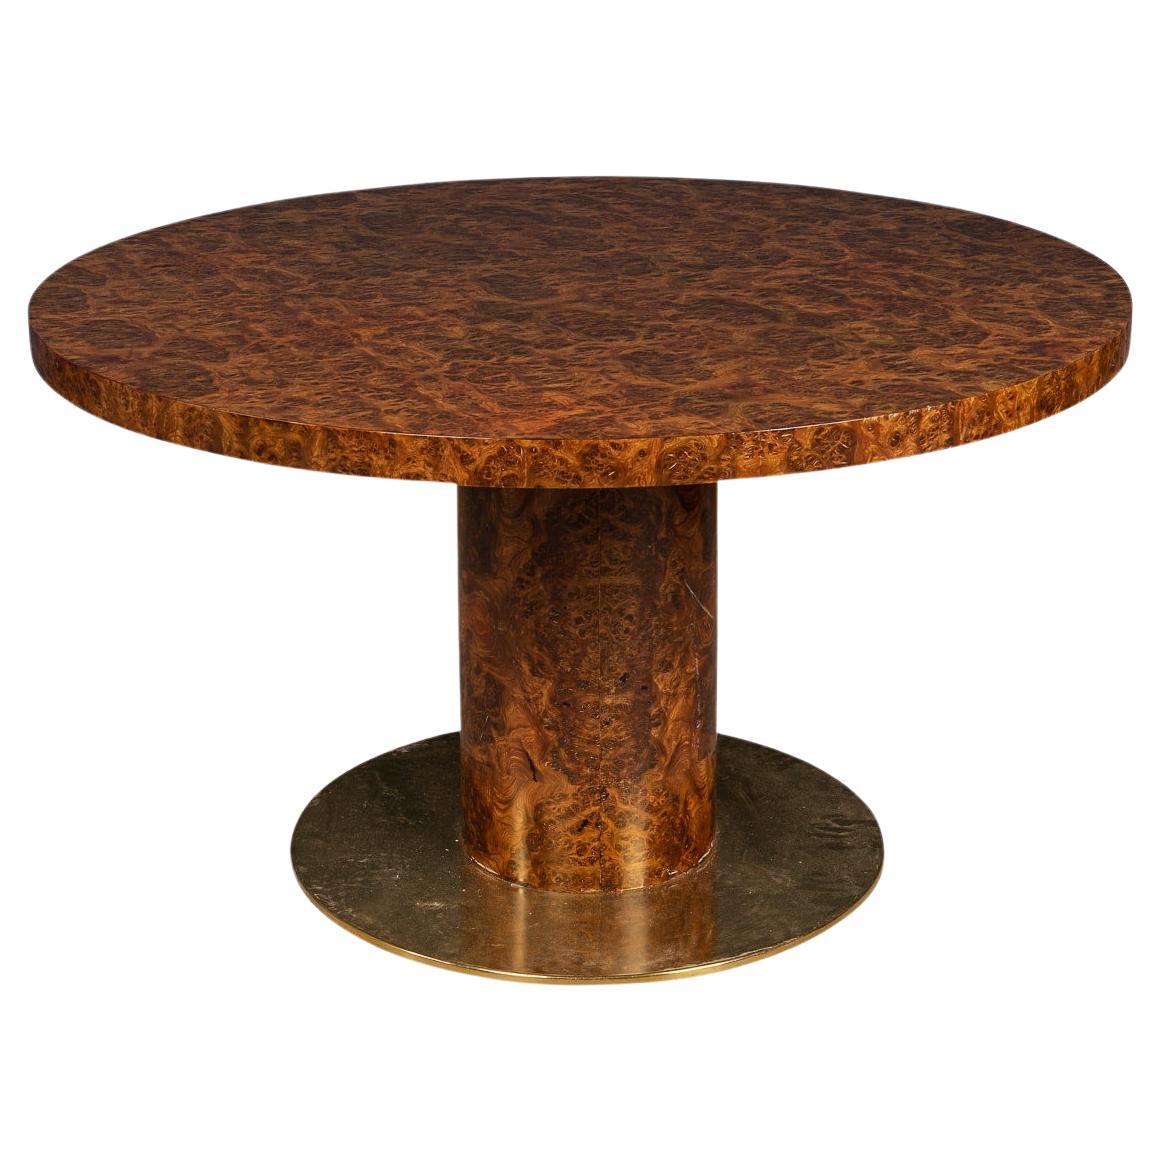 20th Century Burled Walnut Veneer Dining Table by Willy Rizzo, Italy, circa 1970